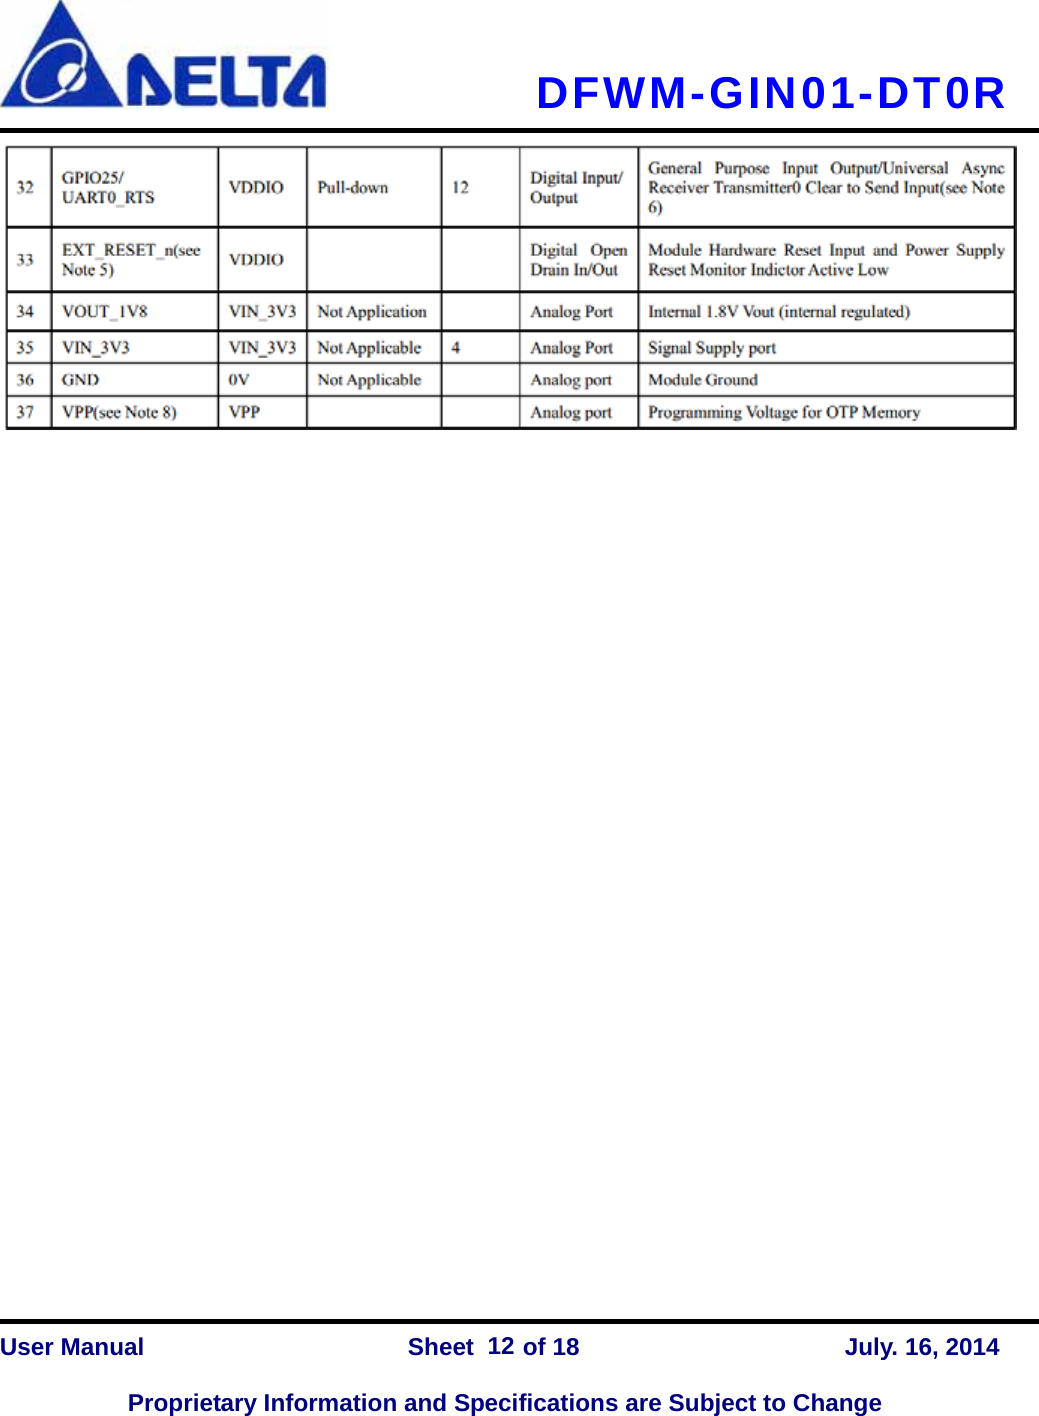   DFWM-GIN01-DT0R    User Manual                Sheet    of 18      July. 16, 2014  Proprietary Information and Specifications are Subject to Change 12                        